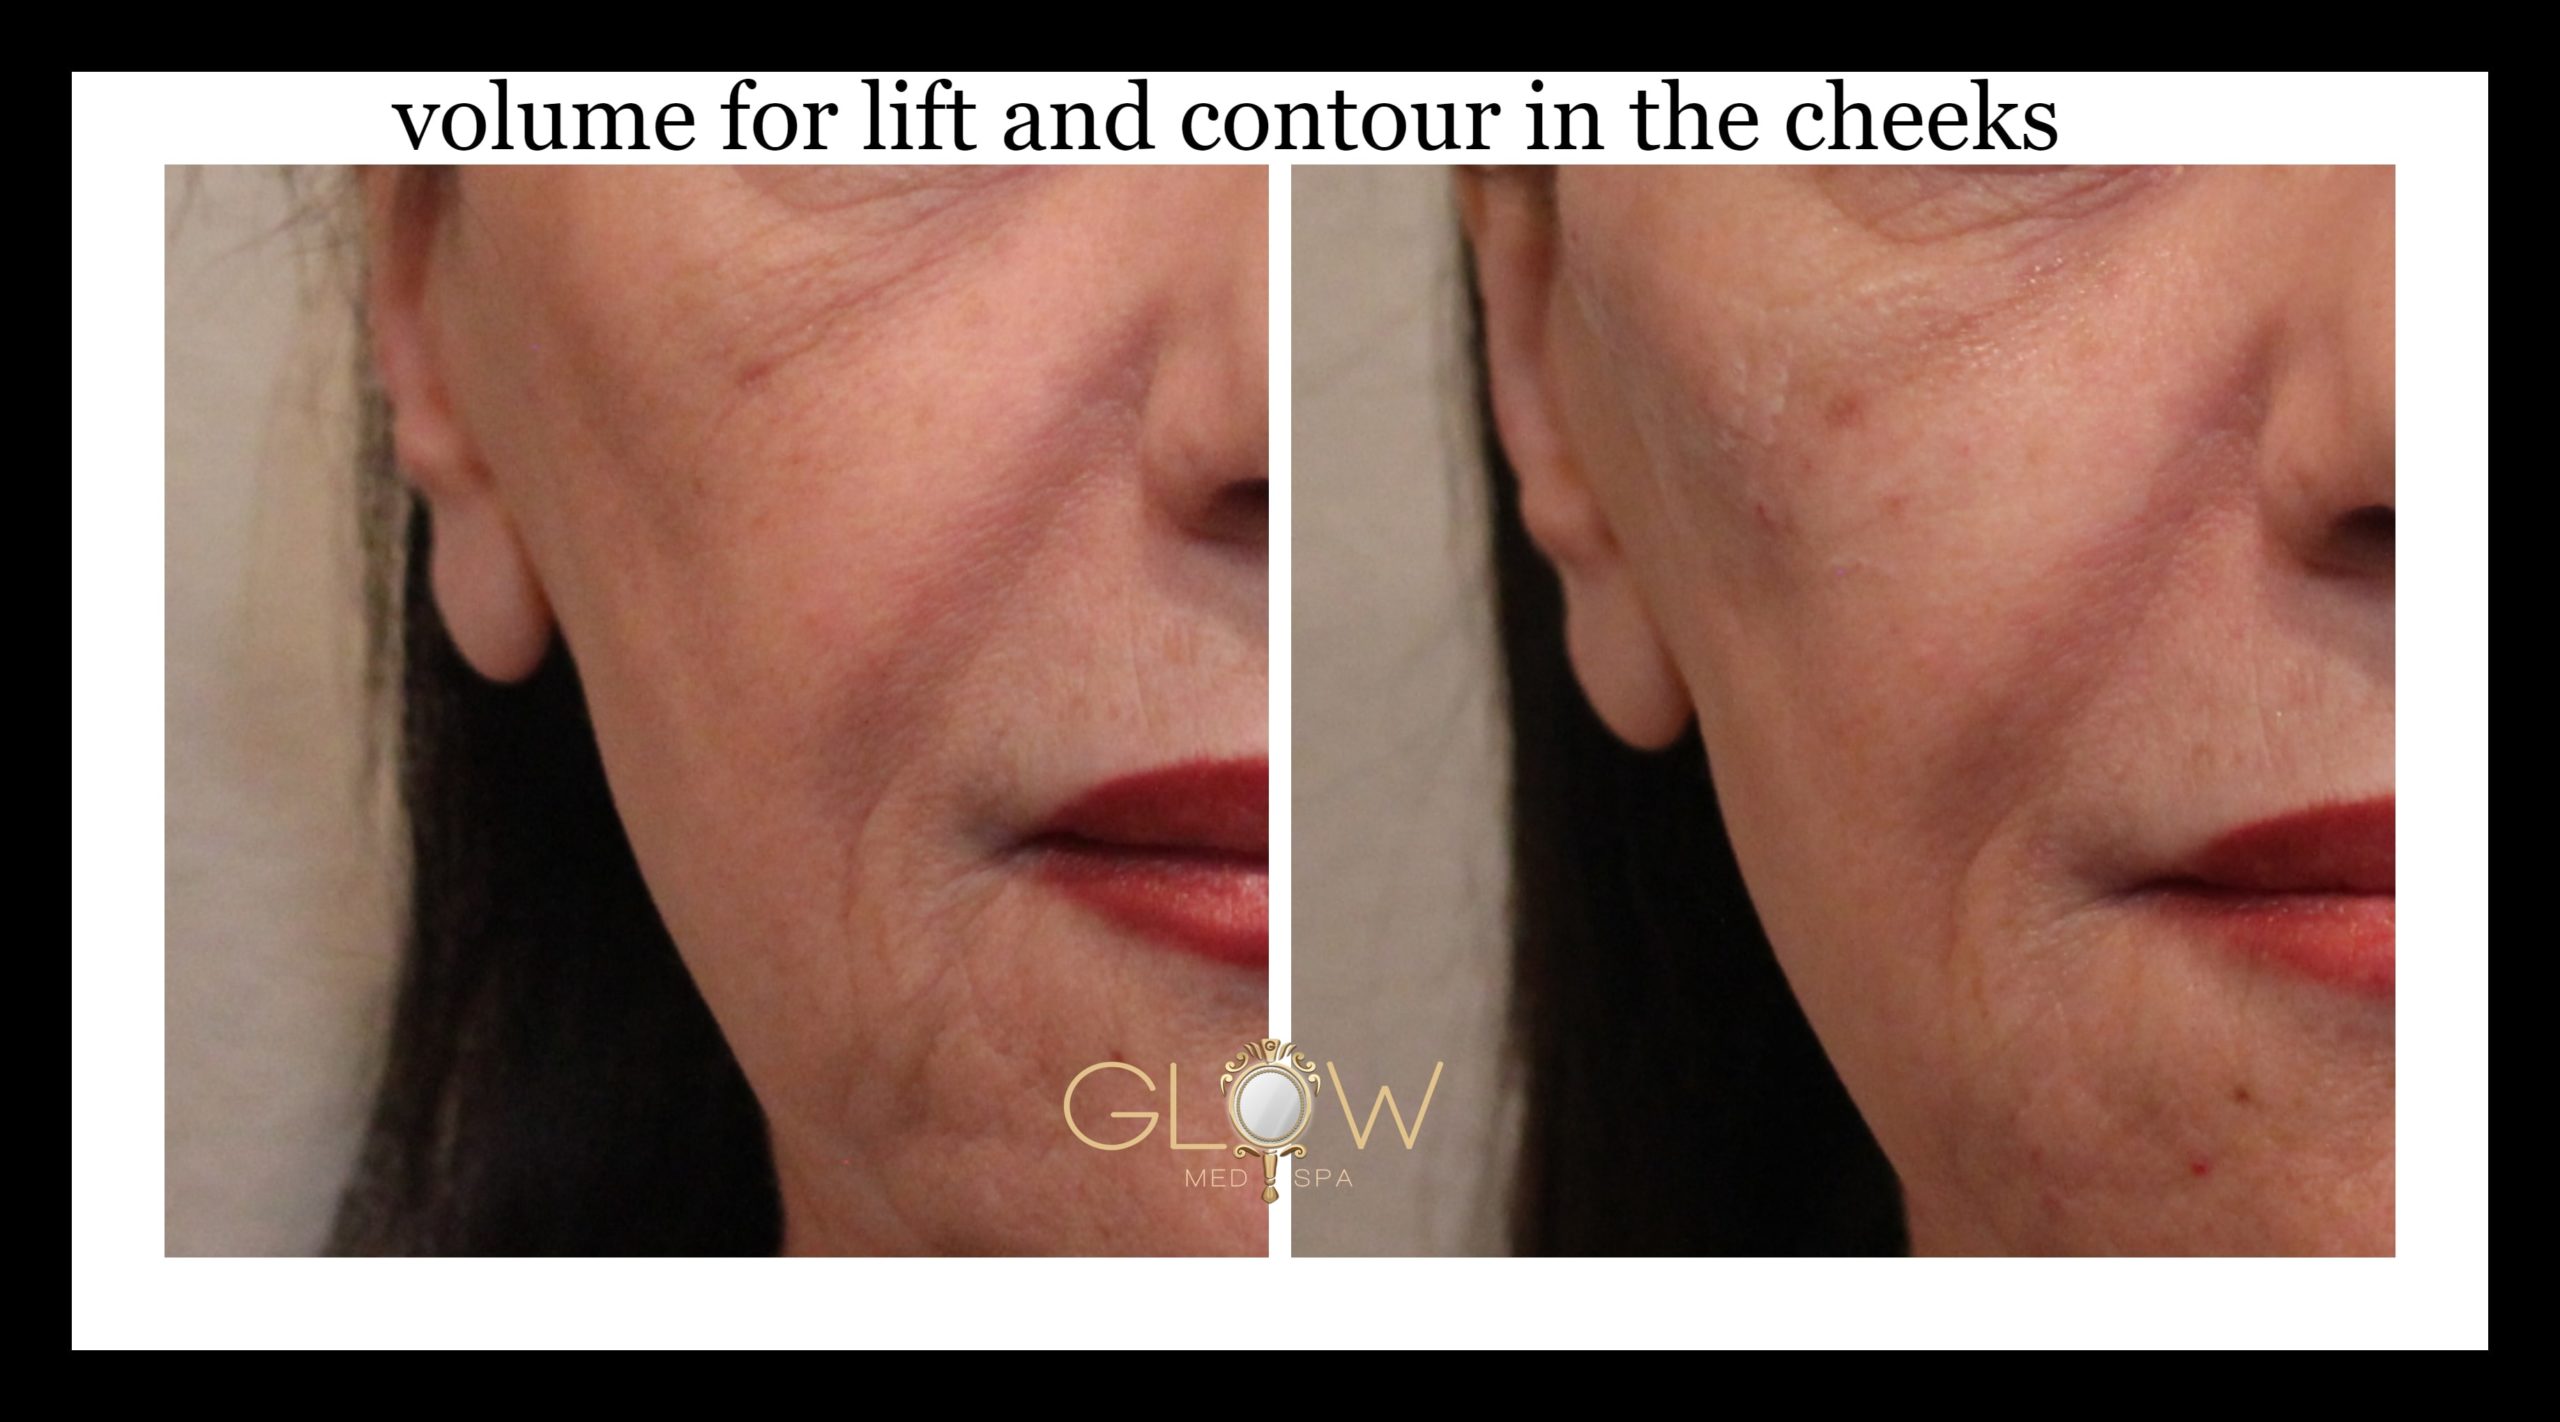 volume for lift and contour in the cheeks